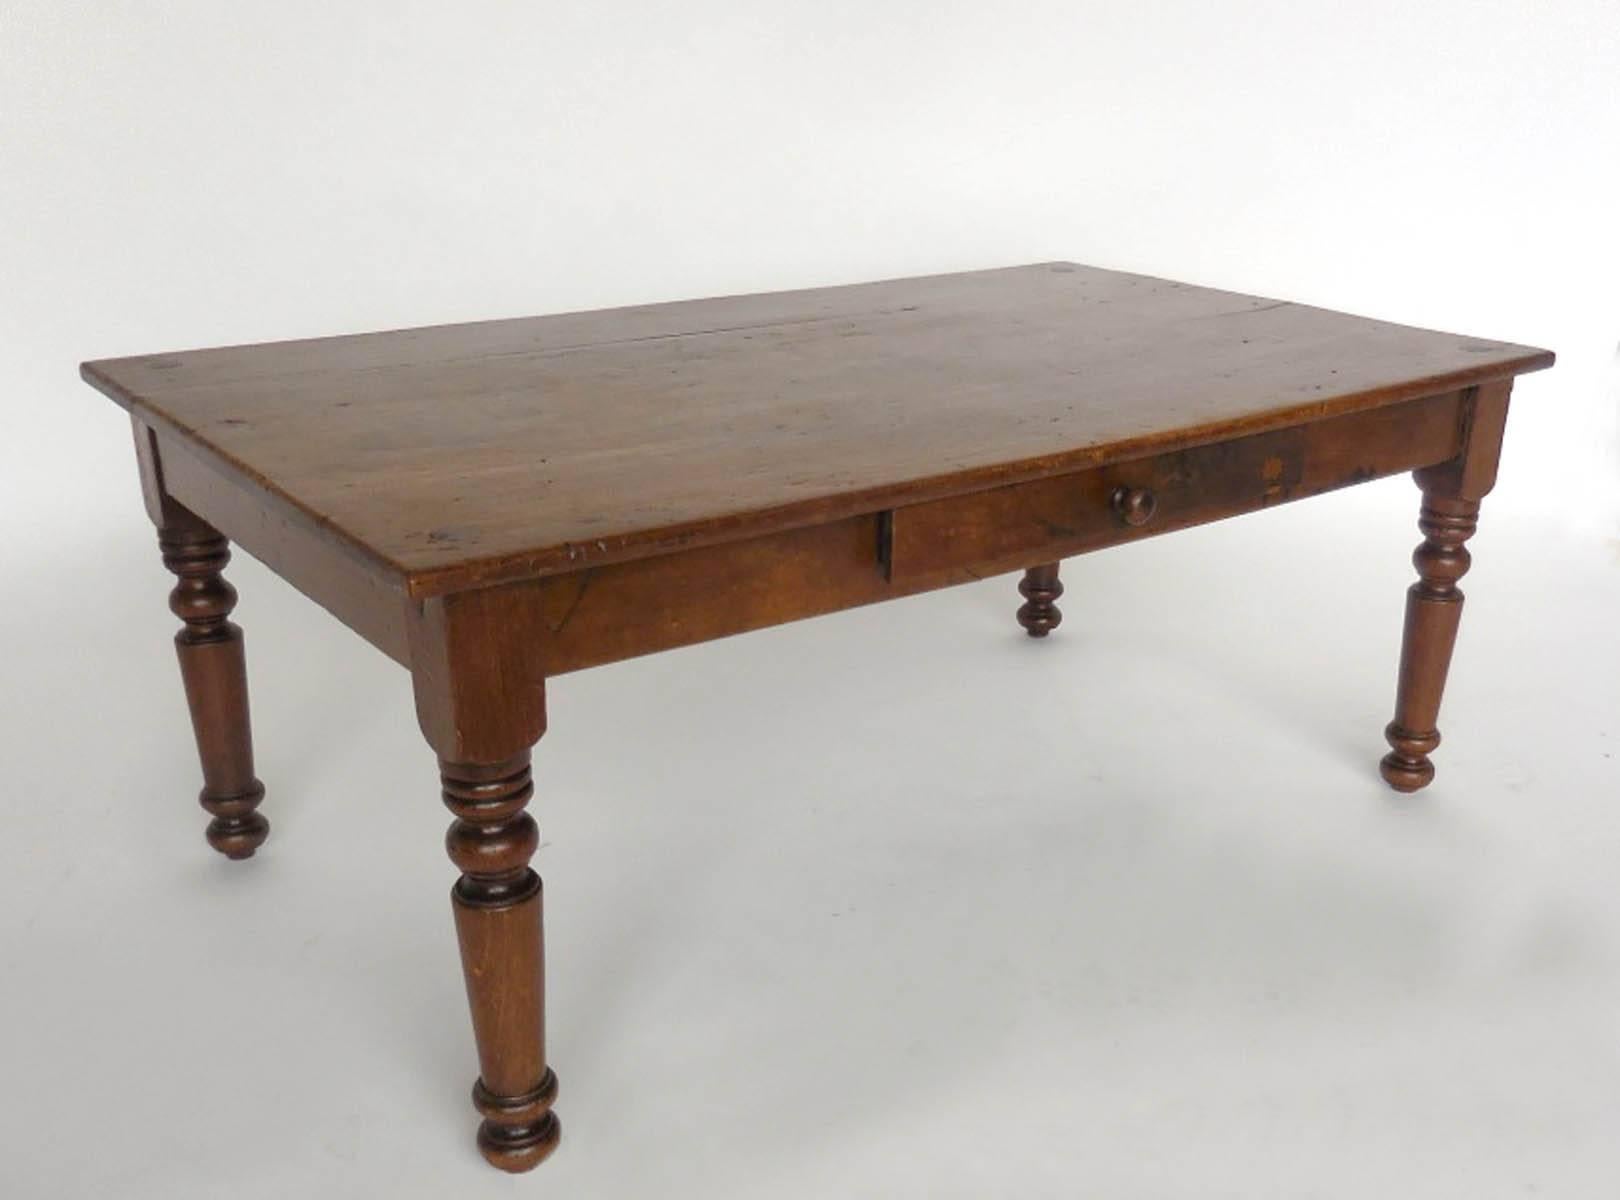 Early 20th century child's bed turned coffee table. Beautiful, simple turned legs, nice patina. Drawer added later on.